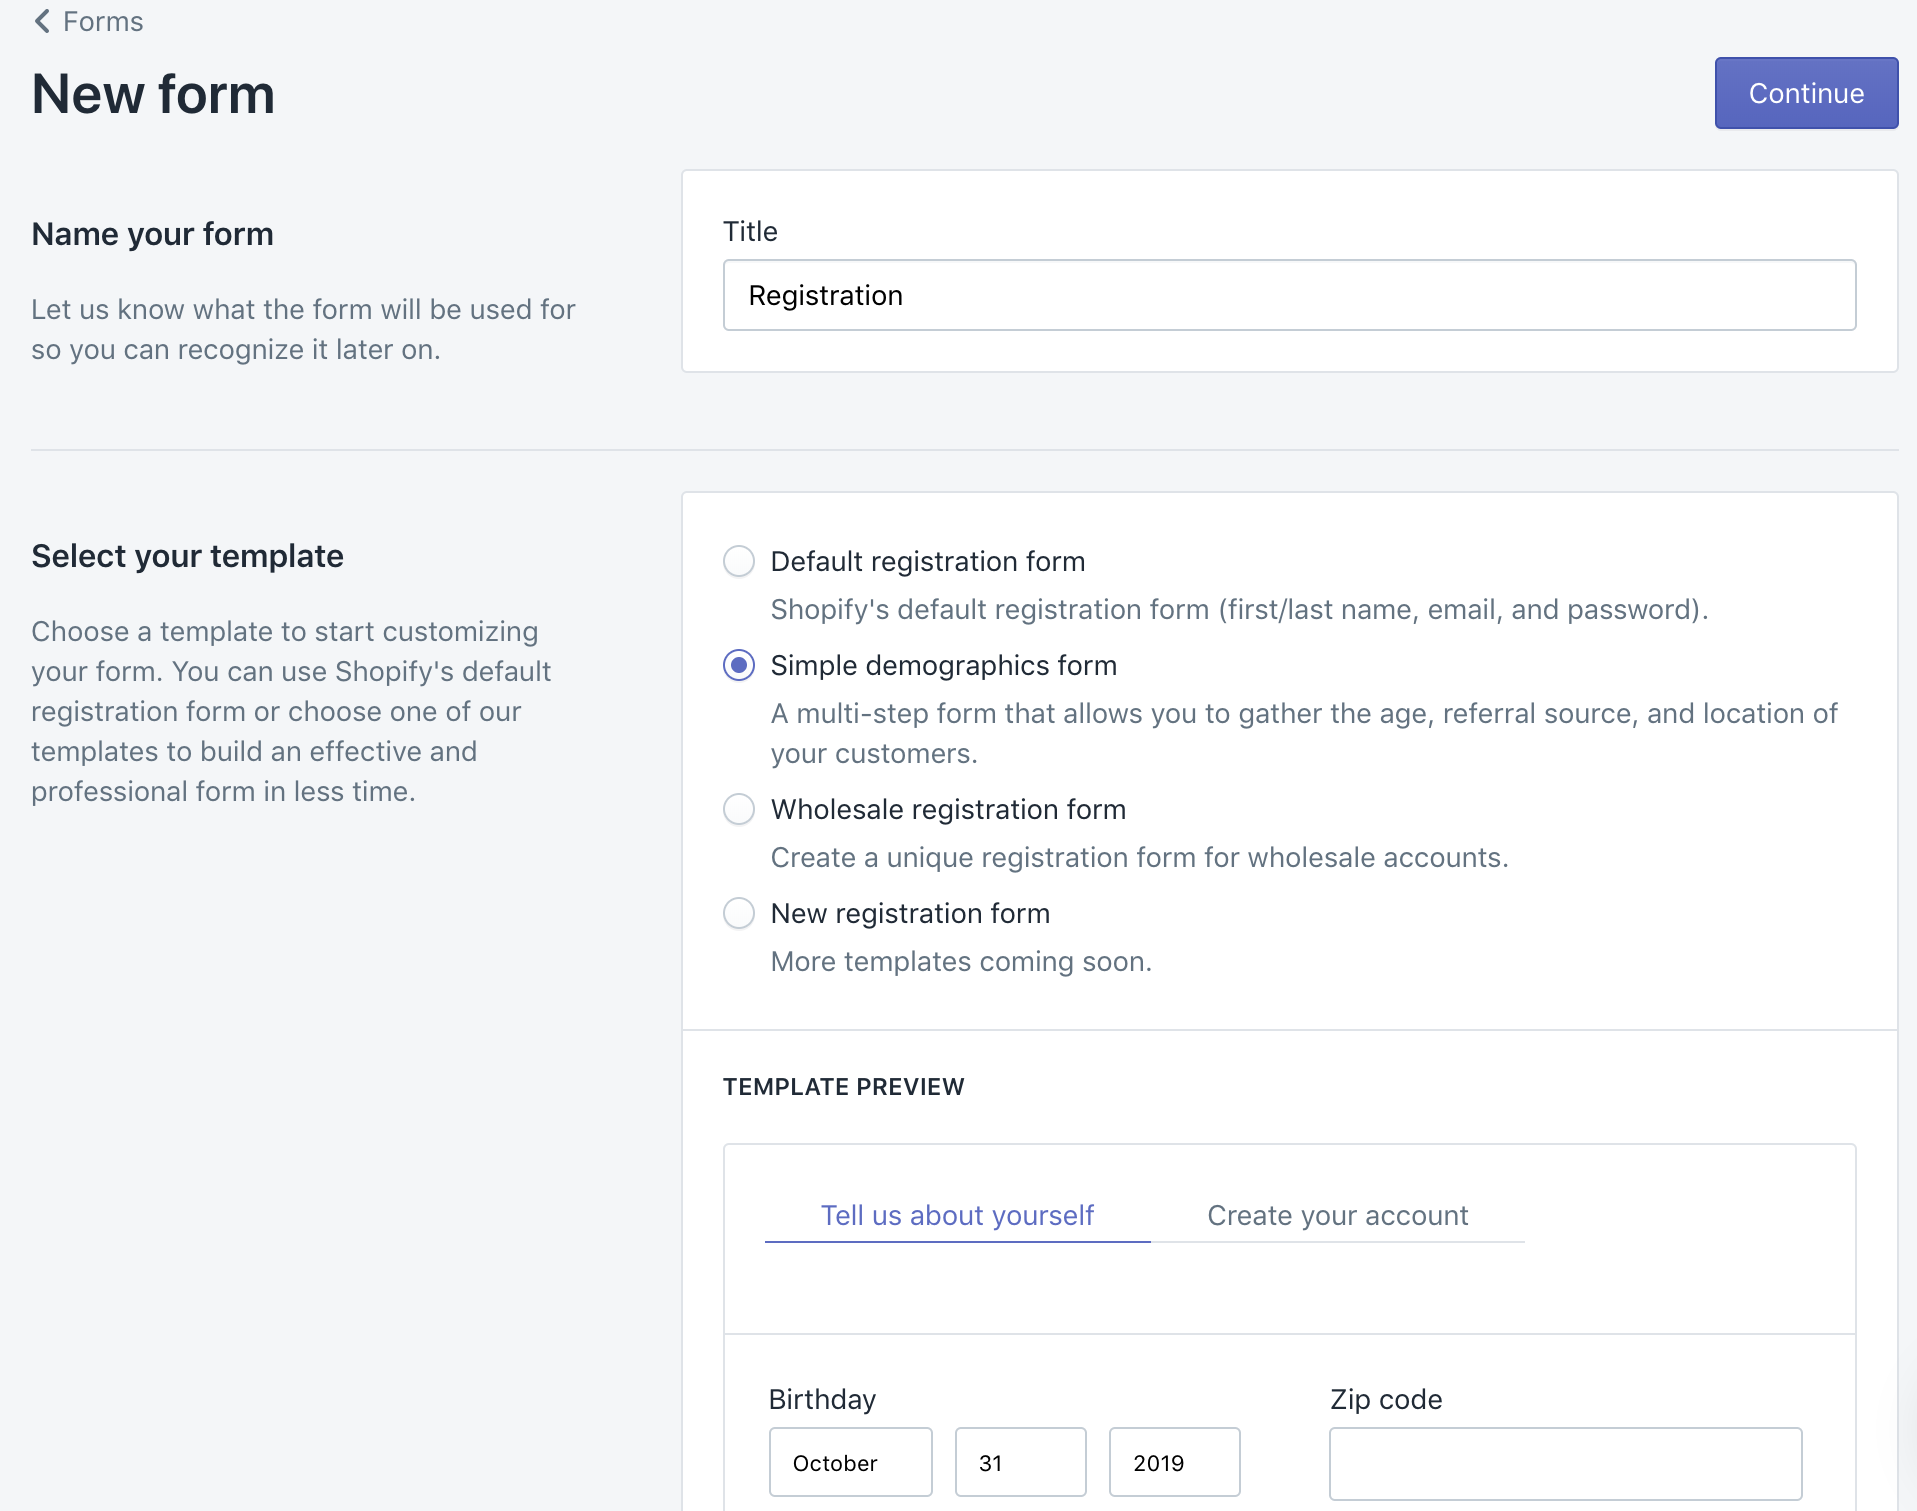 Form templates help you quickly build custom Shopify registration forms